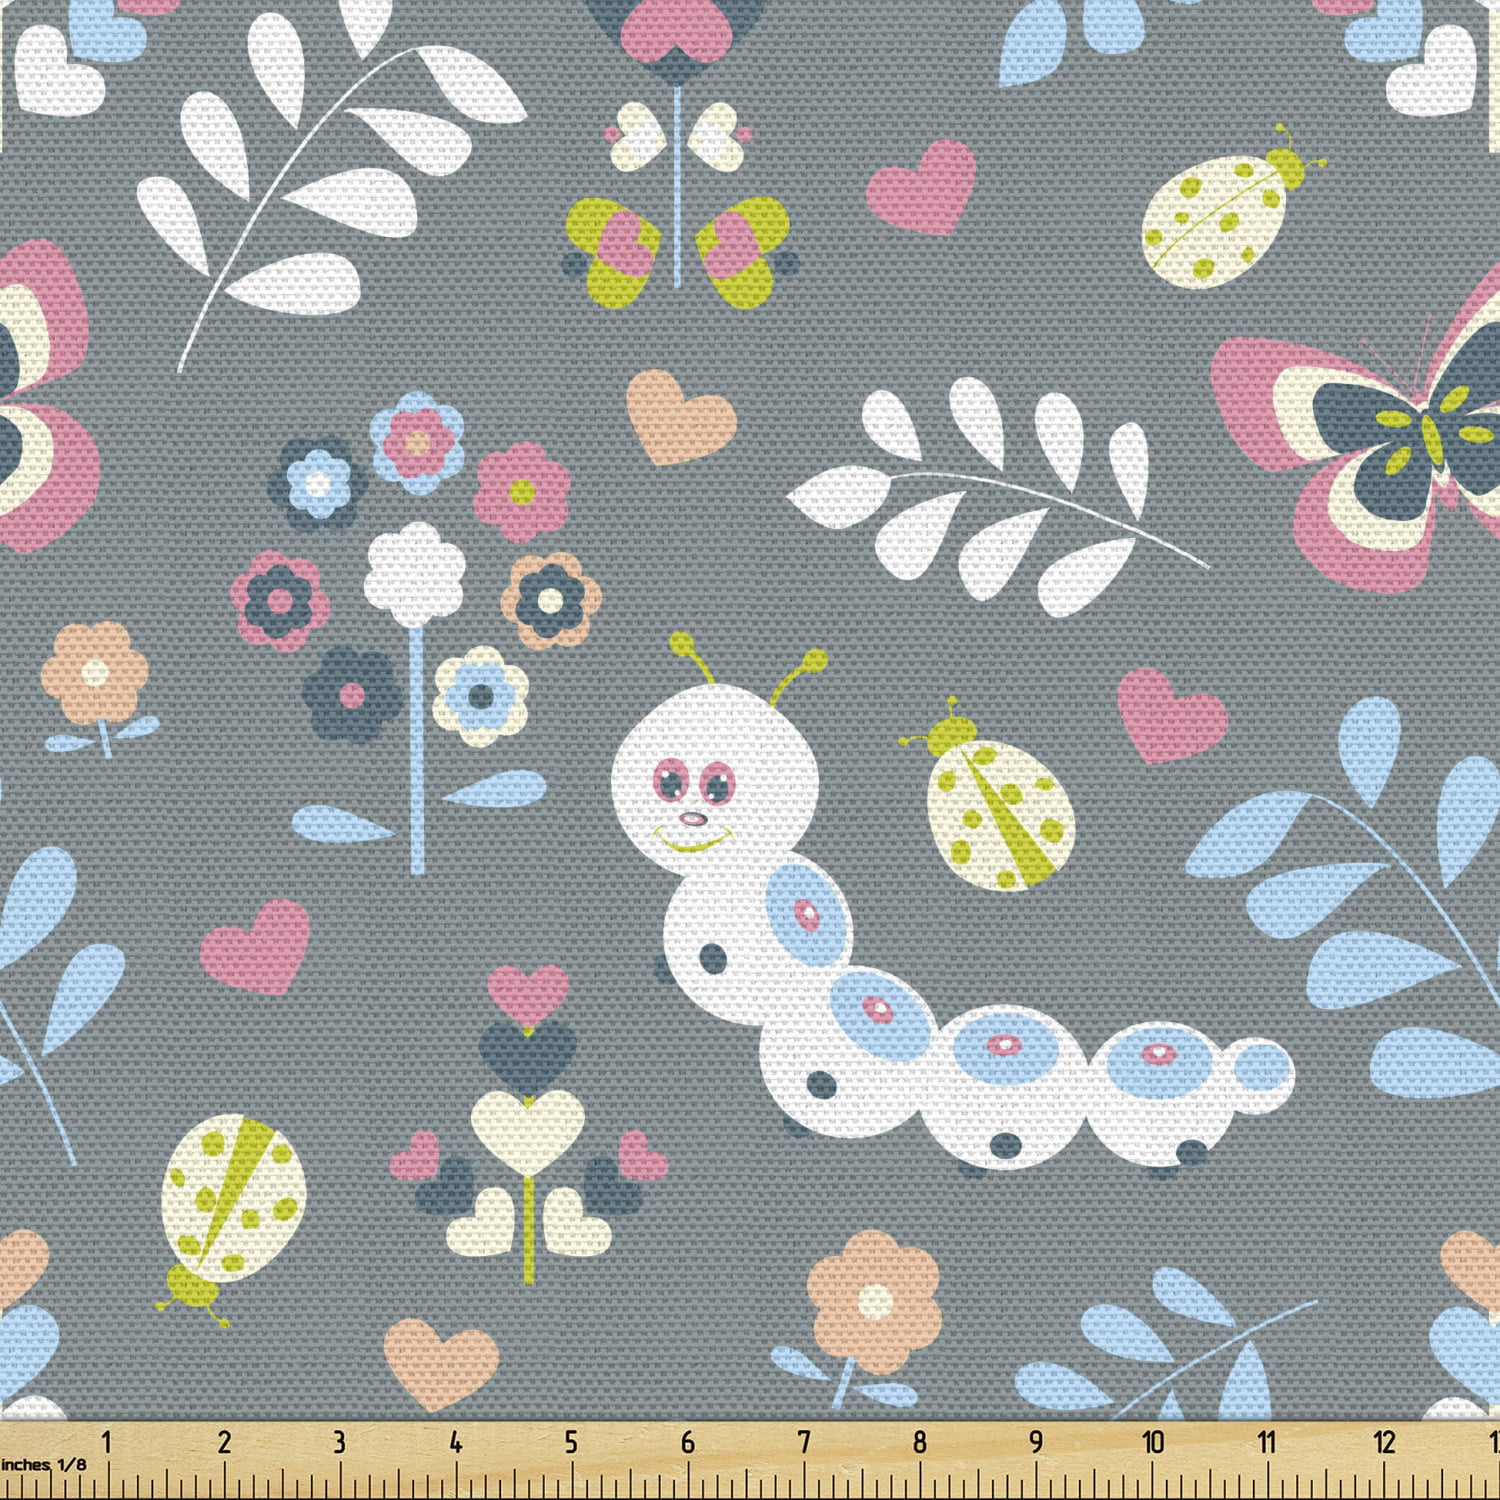 Cartoon Fabric by the Yard Upholstery, Earth Worms Ladybugs Birds Flowers  Pastel Nature Love Hearts Doodle, Decorative Fabric for DIY and Home  Accents, Grey Multicolor by Ambesonne - Walmart.com